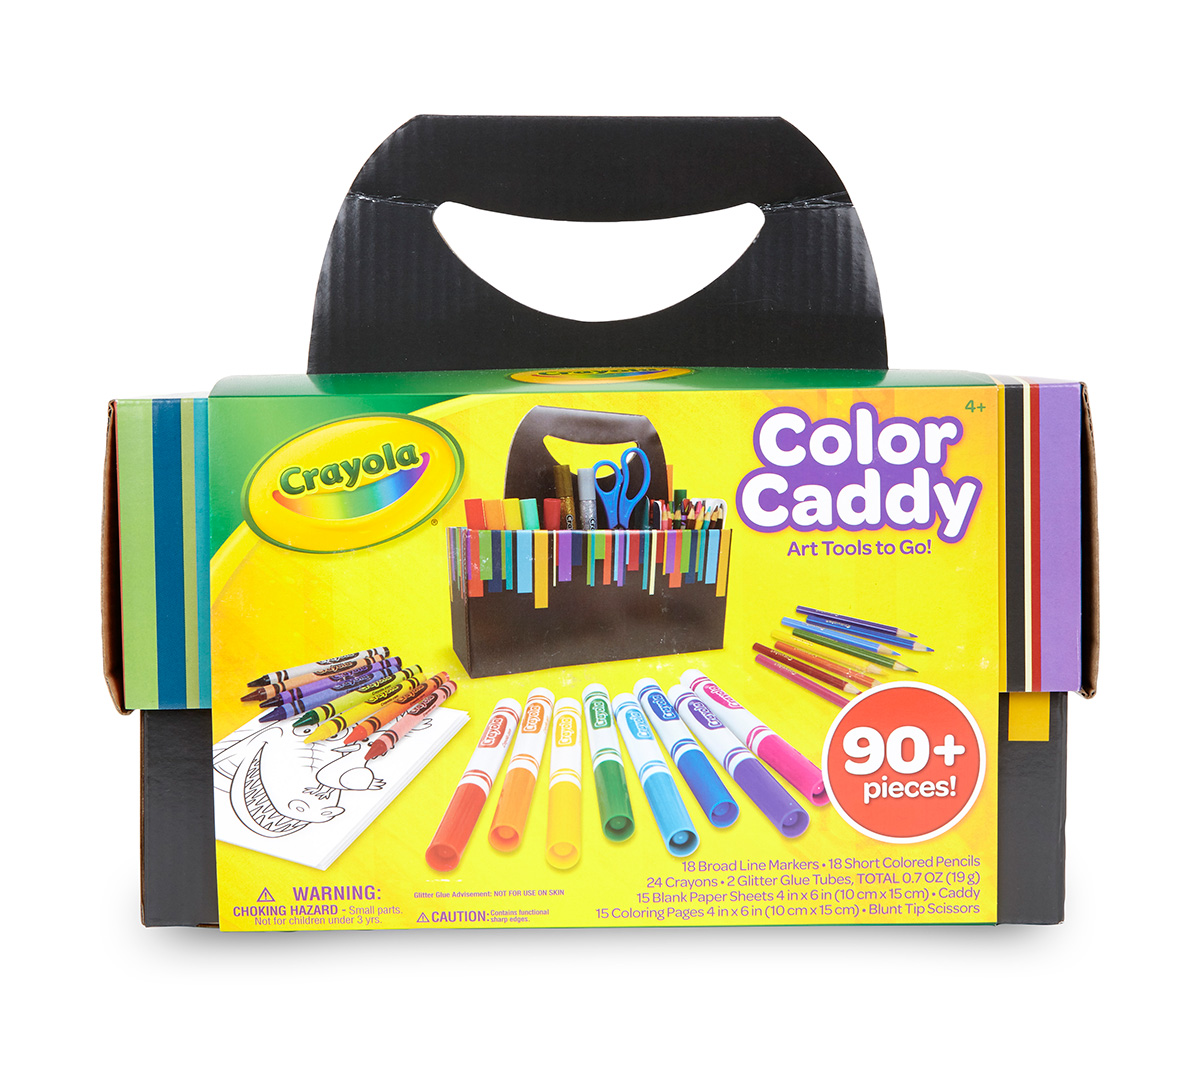 Download Crayola Color Caddy Coloring Set And Storage 18 Markers 24 Crayons 18 Colored Pencils 1 Pair Scissors 2 Glue Sticks 30 Paper Sheets Portable Storage Caddy Crayola